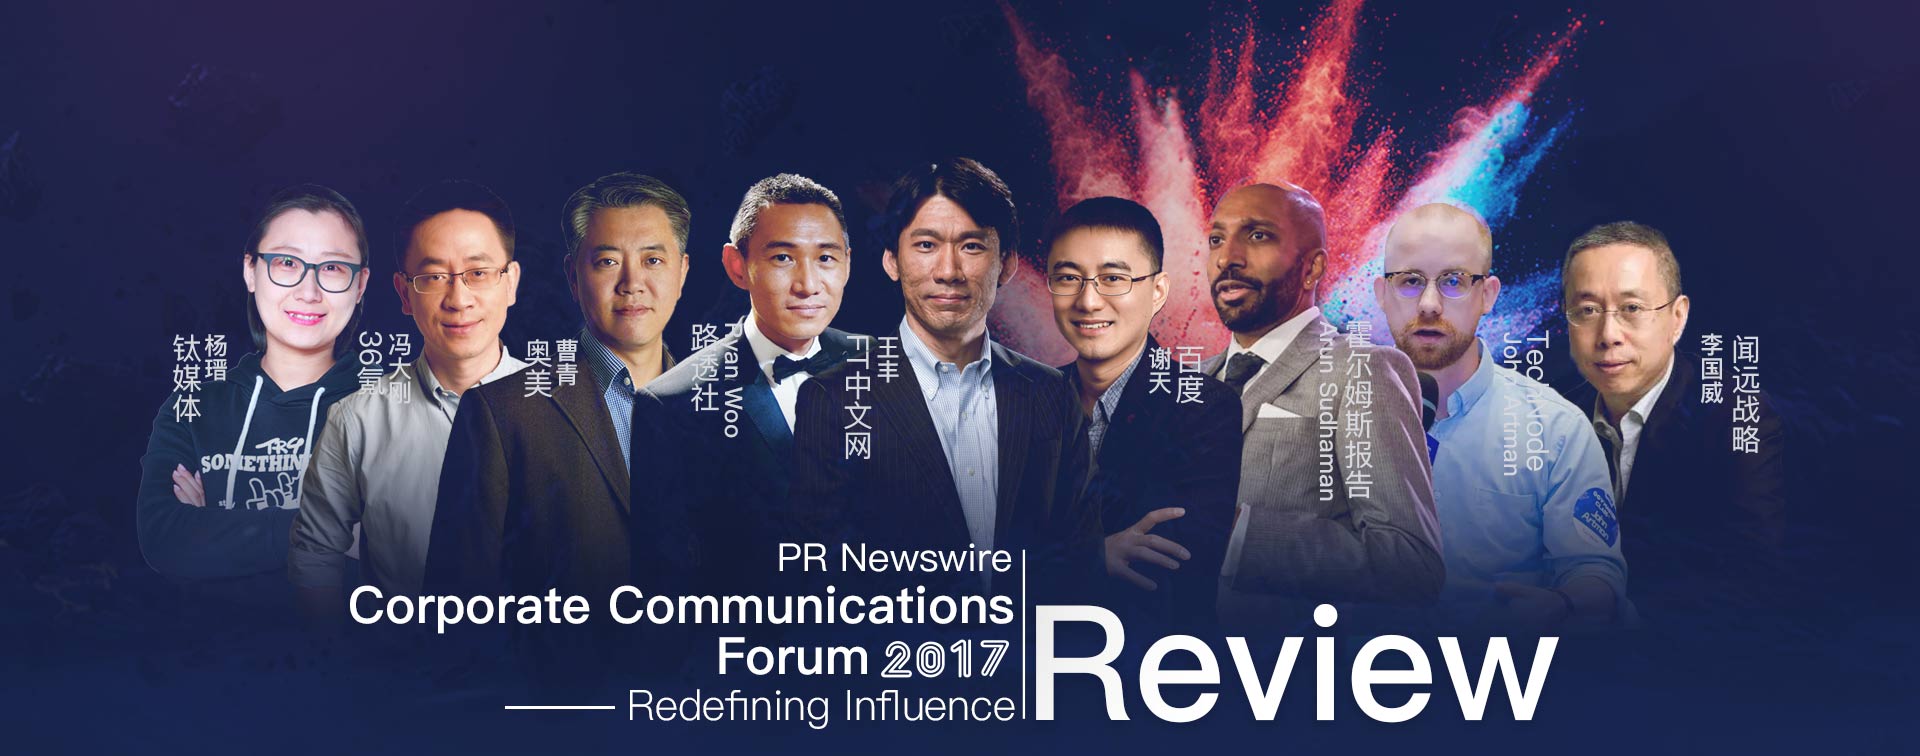 2017 PR Newswire Corporate Communications Forum—Redefining Influence | Review